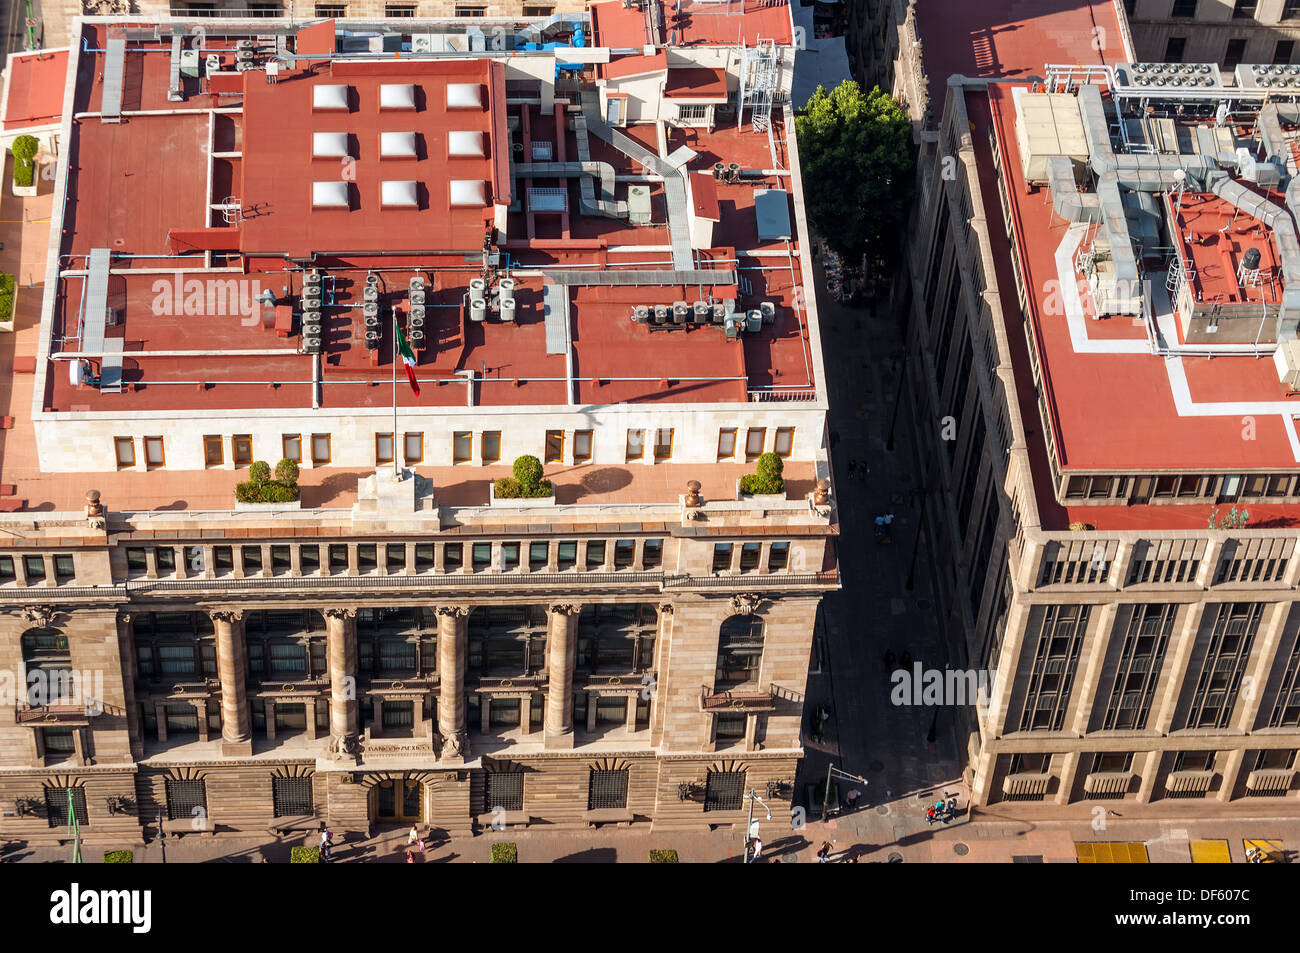 Red rooftops on historical buildings in Mexico City Stock Photo